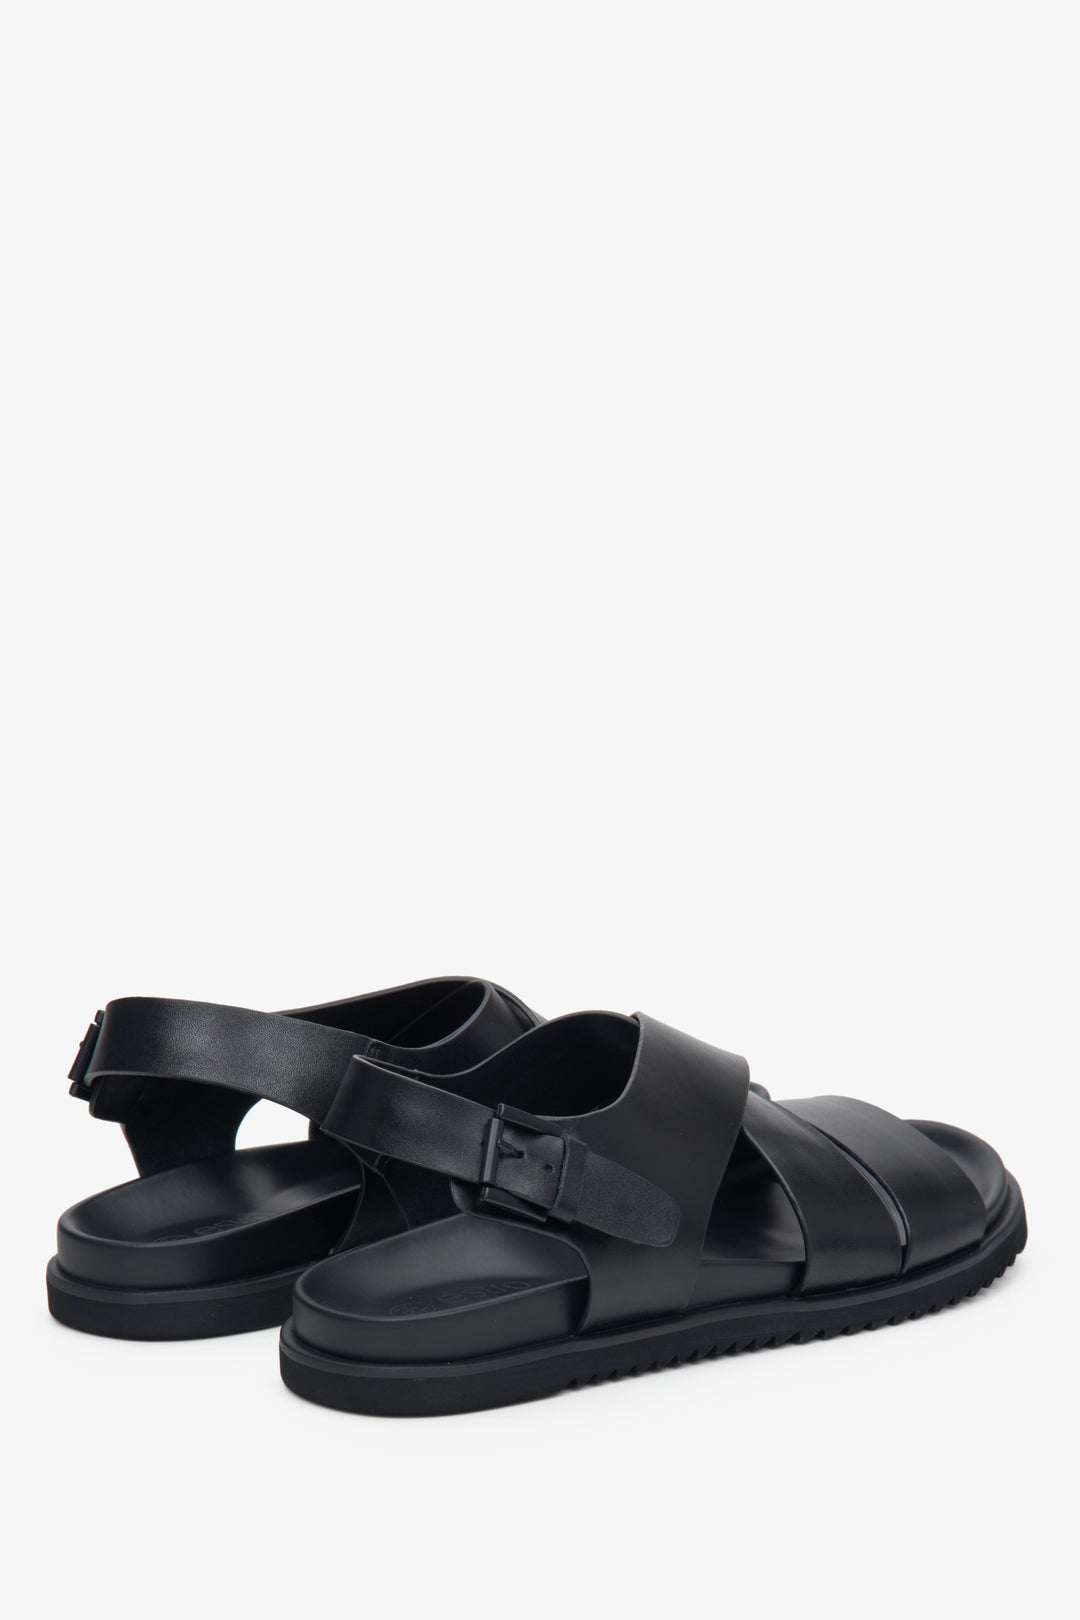 Men's black leather sandals by Estro with thick, crisscrossed straps - close-up of the side stitching and heel.